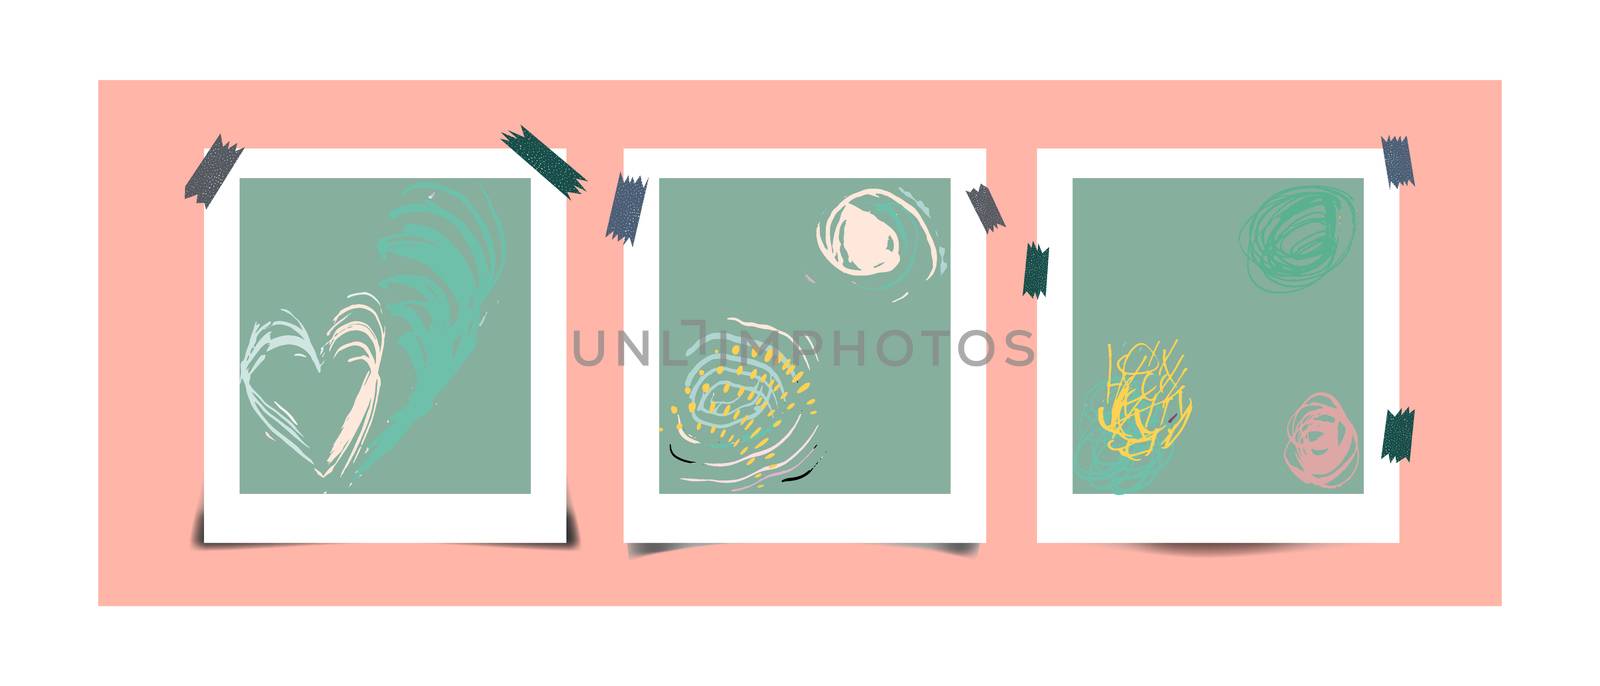 Pink and turquoise elegant creative card templates set with texture decoration. For wallpapers, banners, posters, cards, invitations, design covers, presentation, flyers. Vector illustration.